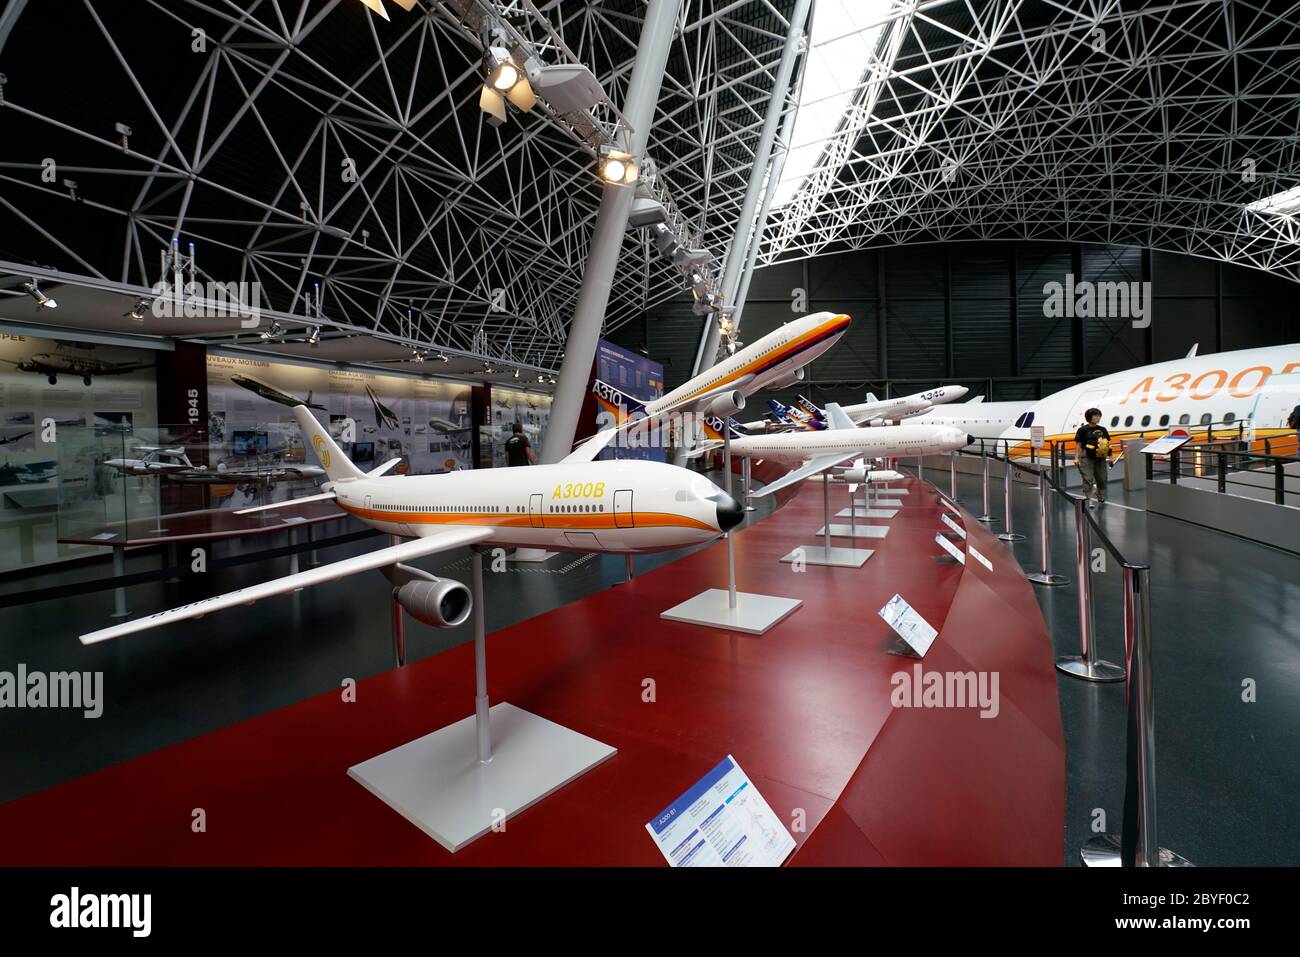 A model of Airbus A300B display at Musee Aeroscopia Museum. Blagnac.Toulouse.Haute-Garonne.Occitanie.France Stock Photo